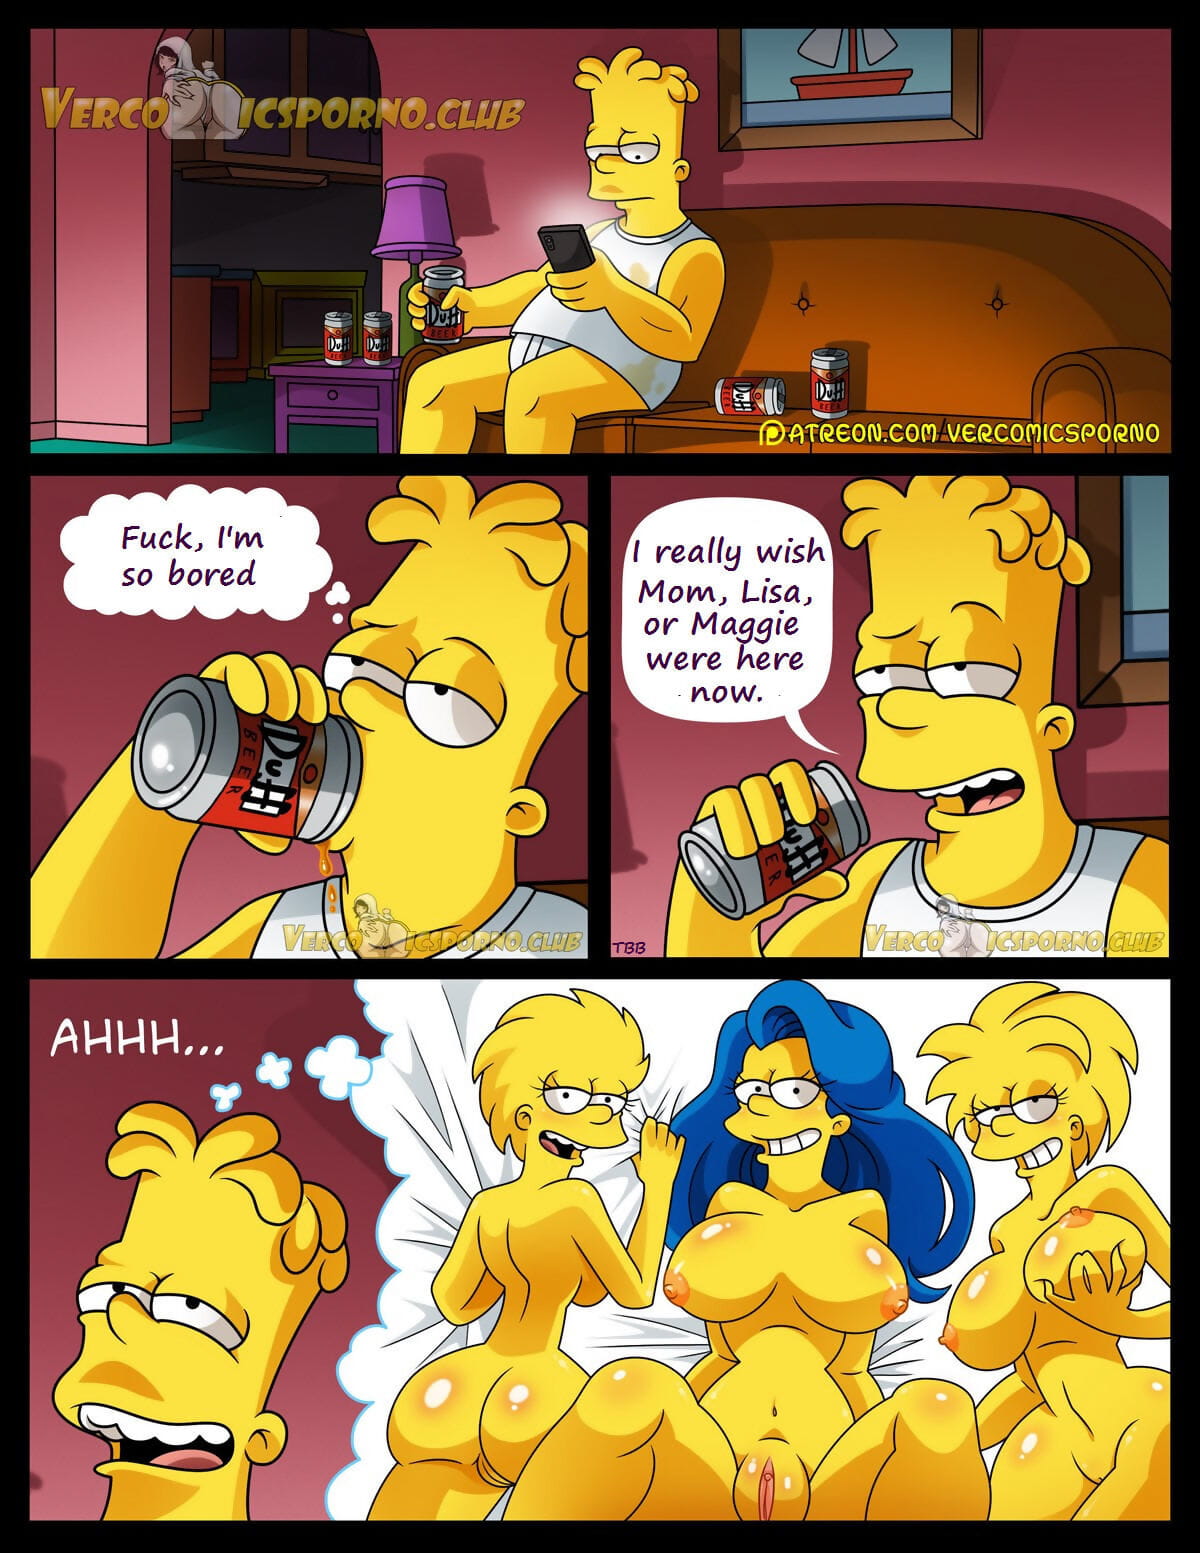 croc there’s no Sexo sin “ex” – los simpsons page 1